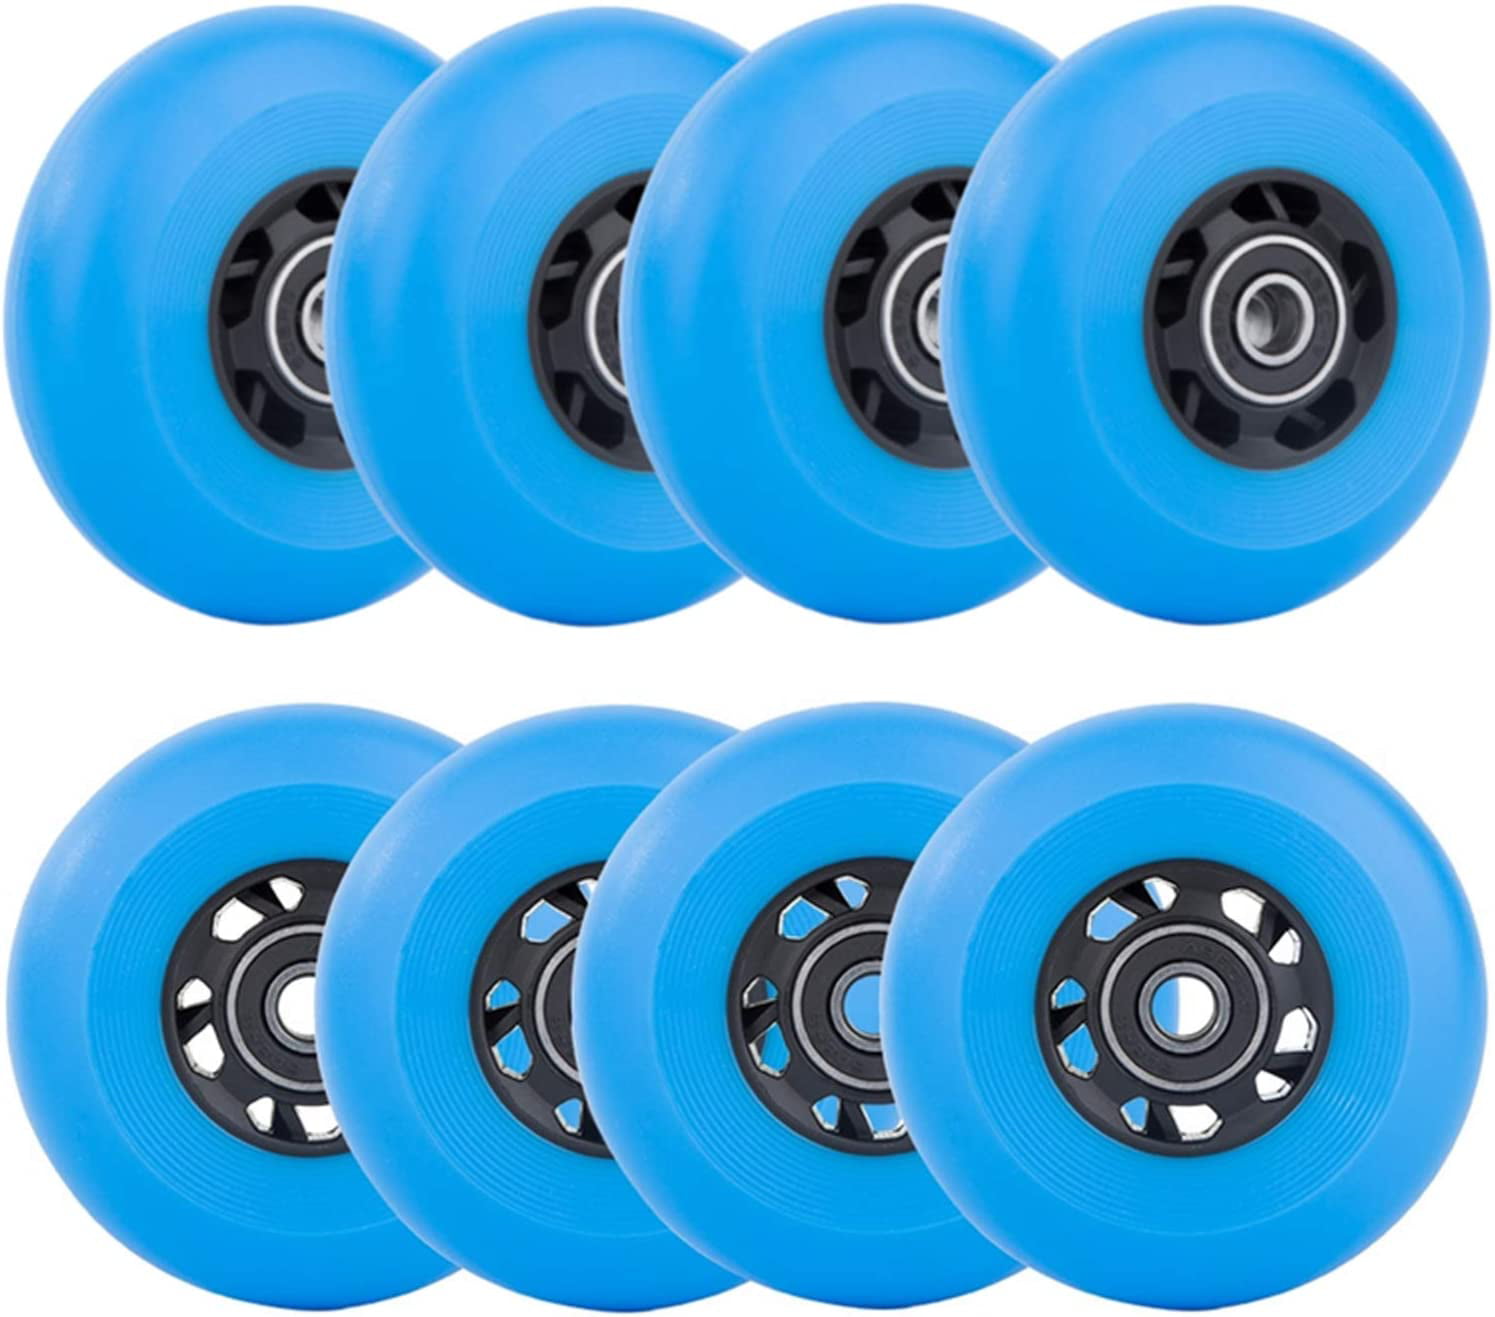 Baoblaze 8Pcs/Pack Quality Inline Roller Skate Wheels Replacement Spacers 